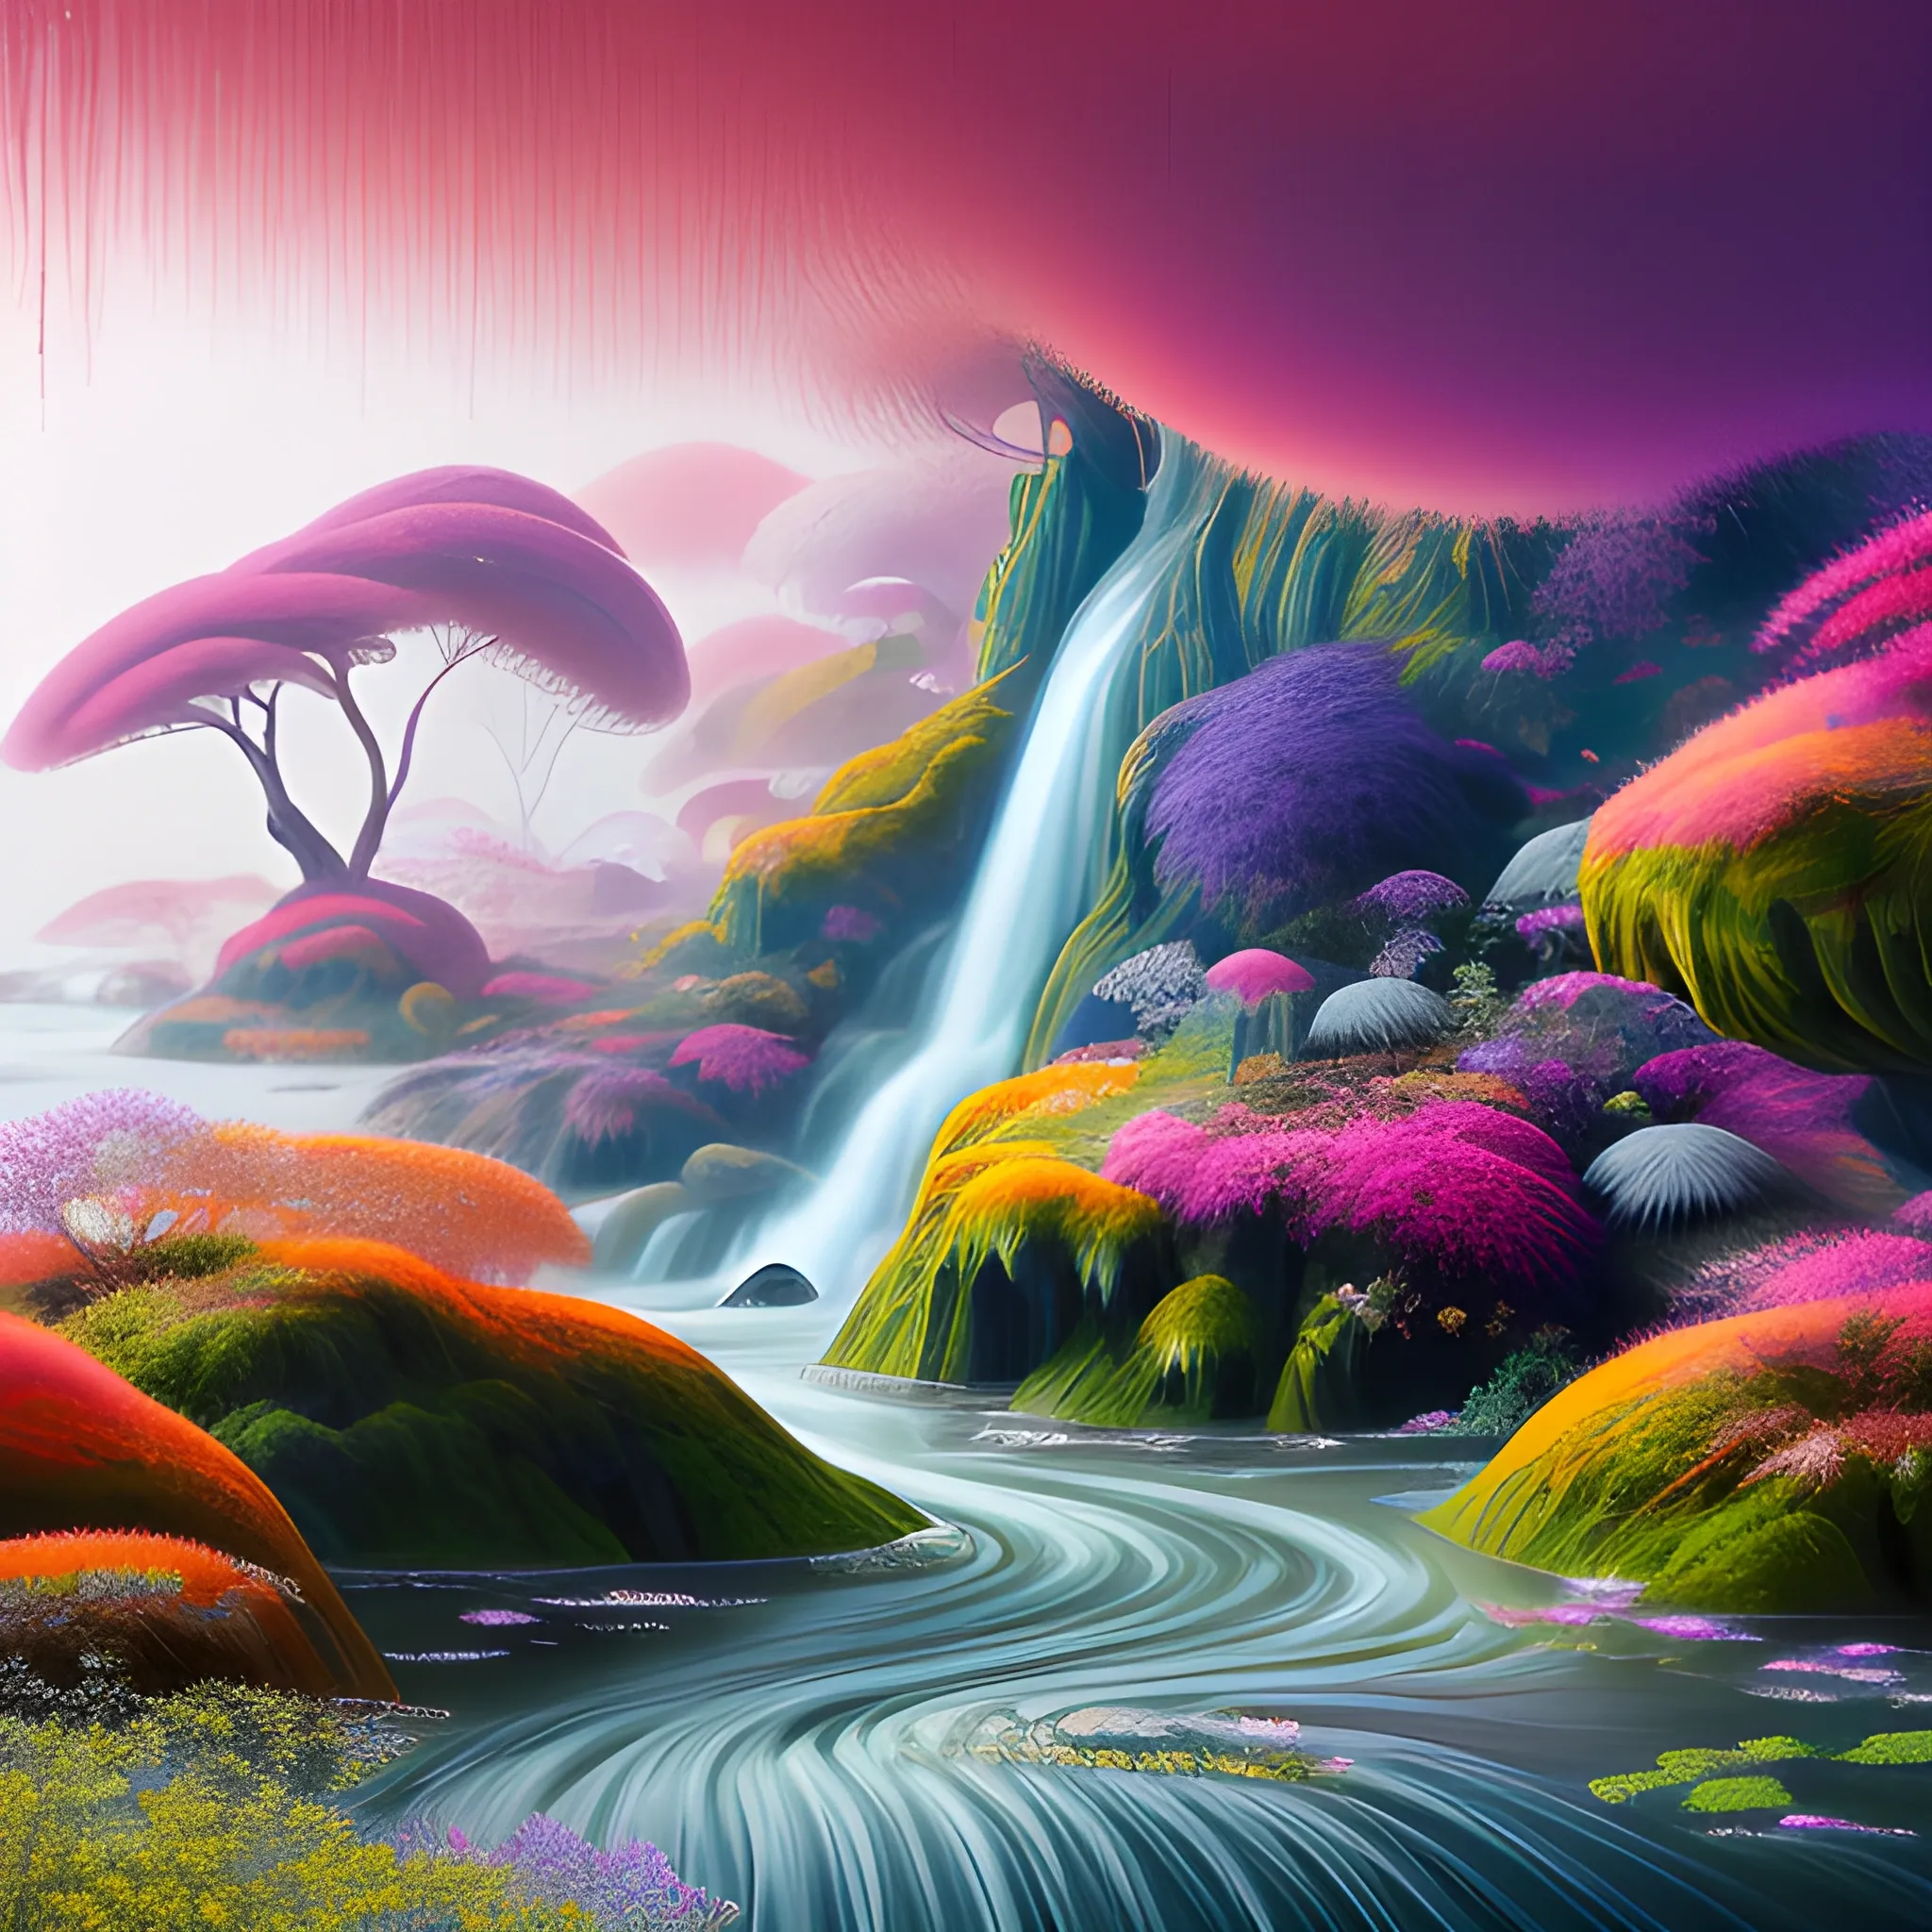 (by Ananta Mandal (and Andrew Biraj:0.5)), (in the style of nihonga), Style: Abstract, Medium: Digital illustration, Subject: An otherworldly landscape with floating islands, cascading waterfalls, and vibrant flora and fauna. Camera Angle: Overhead shot capturing the vastness and intricate details of the scene. The colors are saturated, and the lighting creates a warm and ethereal atmosphere. The painting is highly detailed, with every brushstroke capturing the complexity of the imaginary world., (high quality), (detailed), (masterpiece), (best quality), (highres), (extremely detailed), (8k), seed:7015689